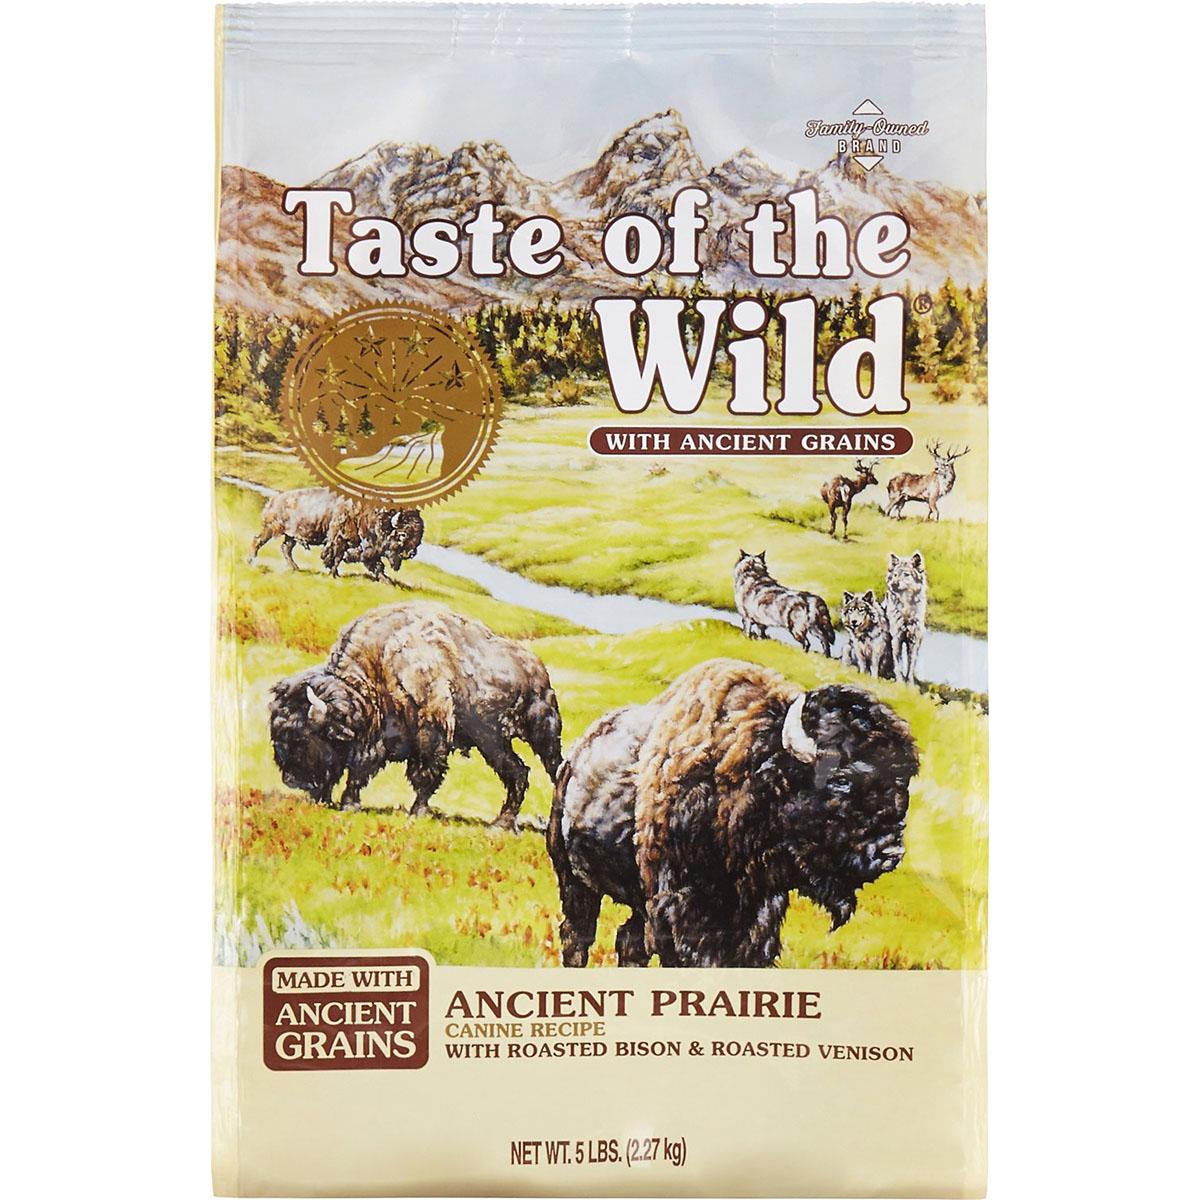 Taste of the Wild Ancient Prairie with Ancient Grains Dry Dog Food 